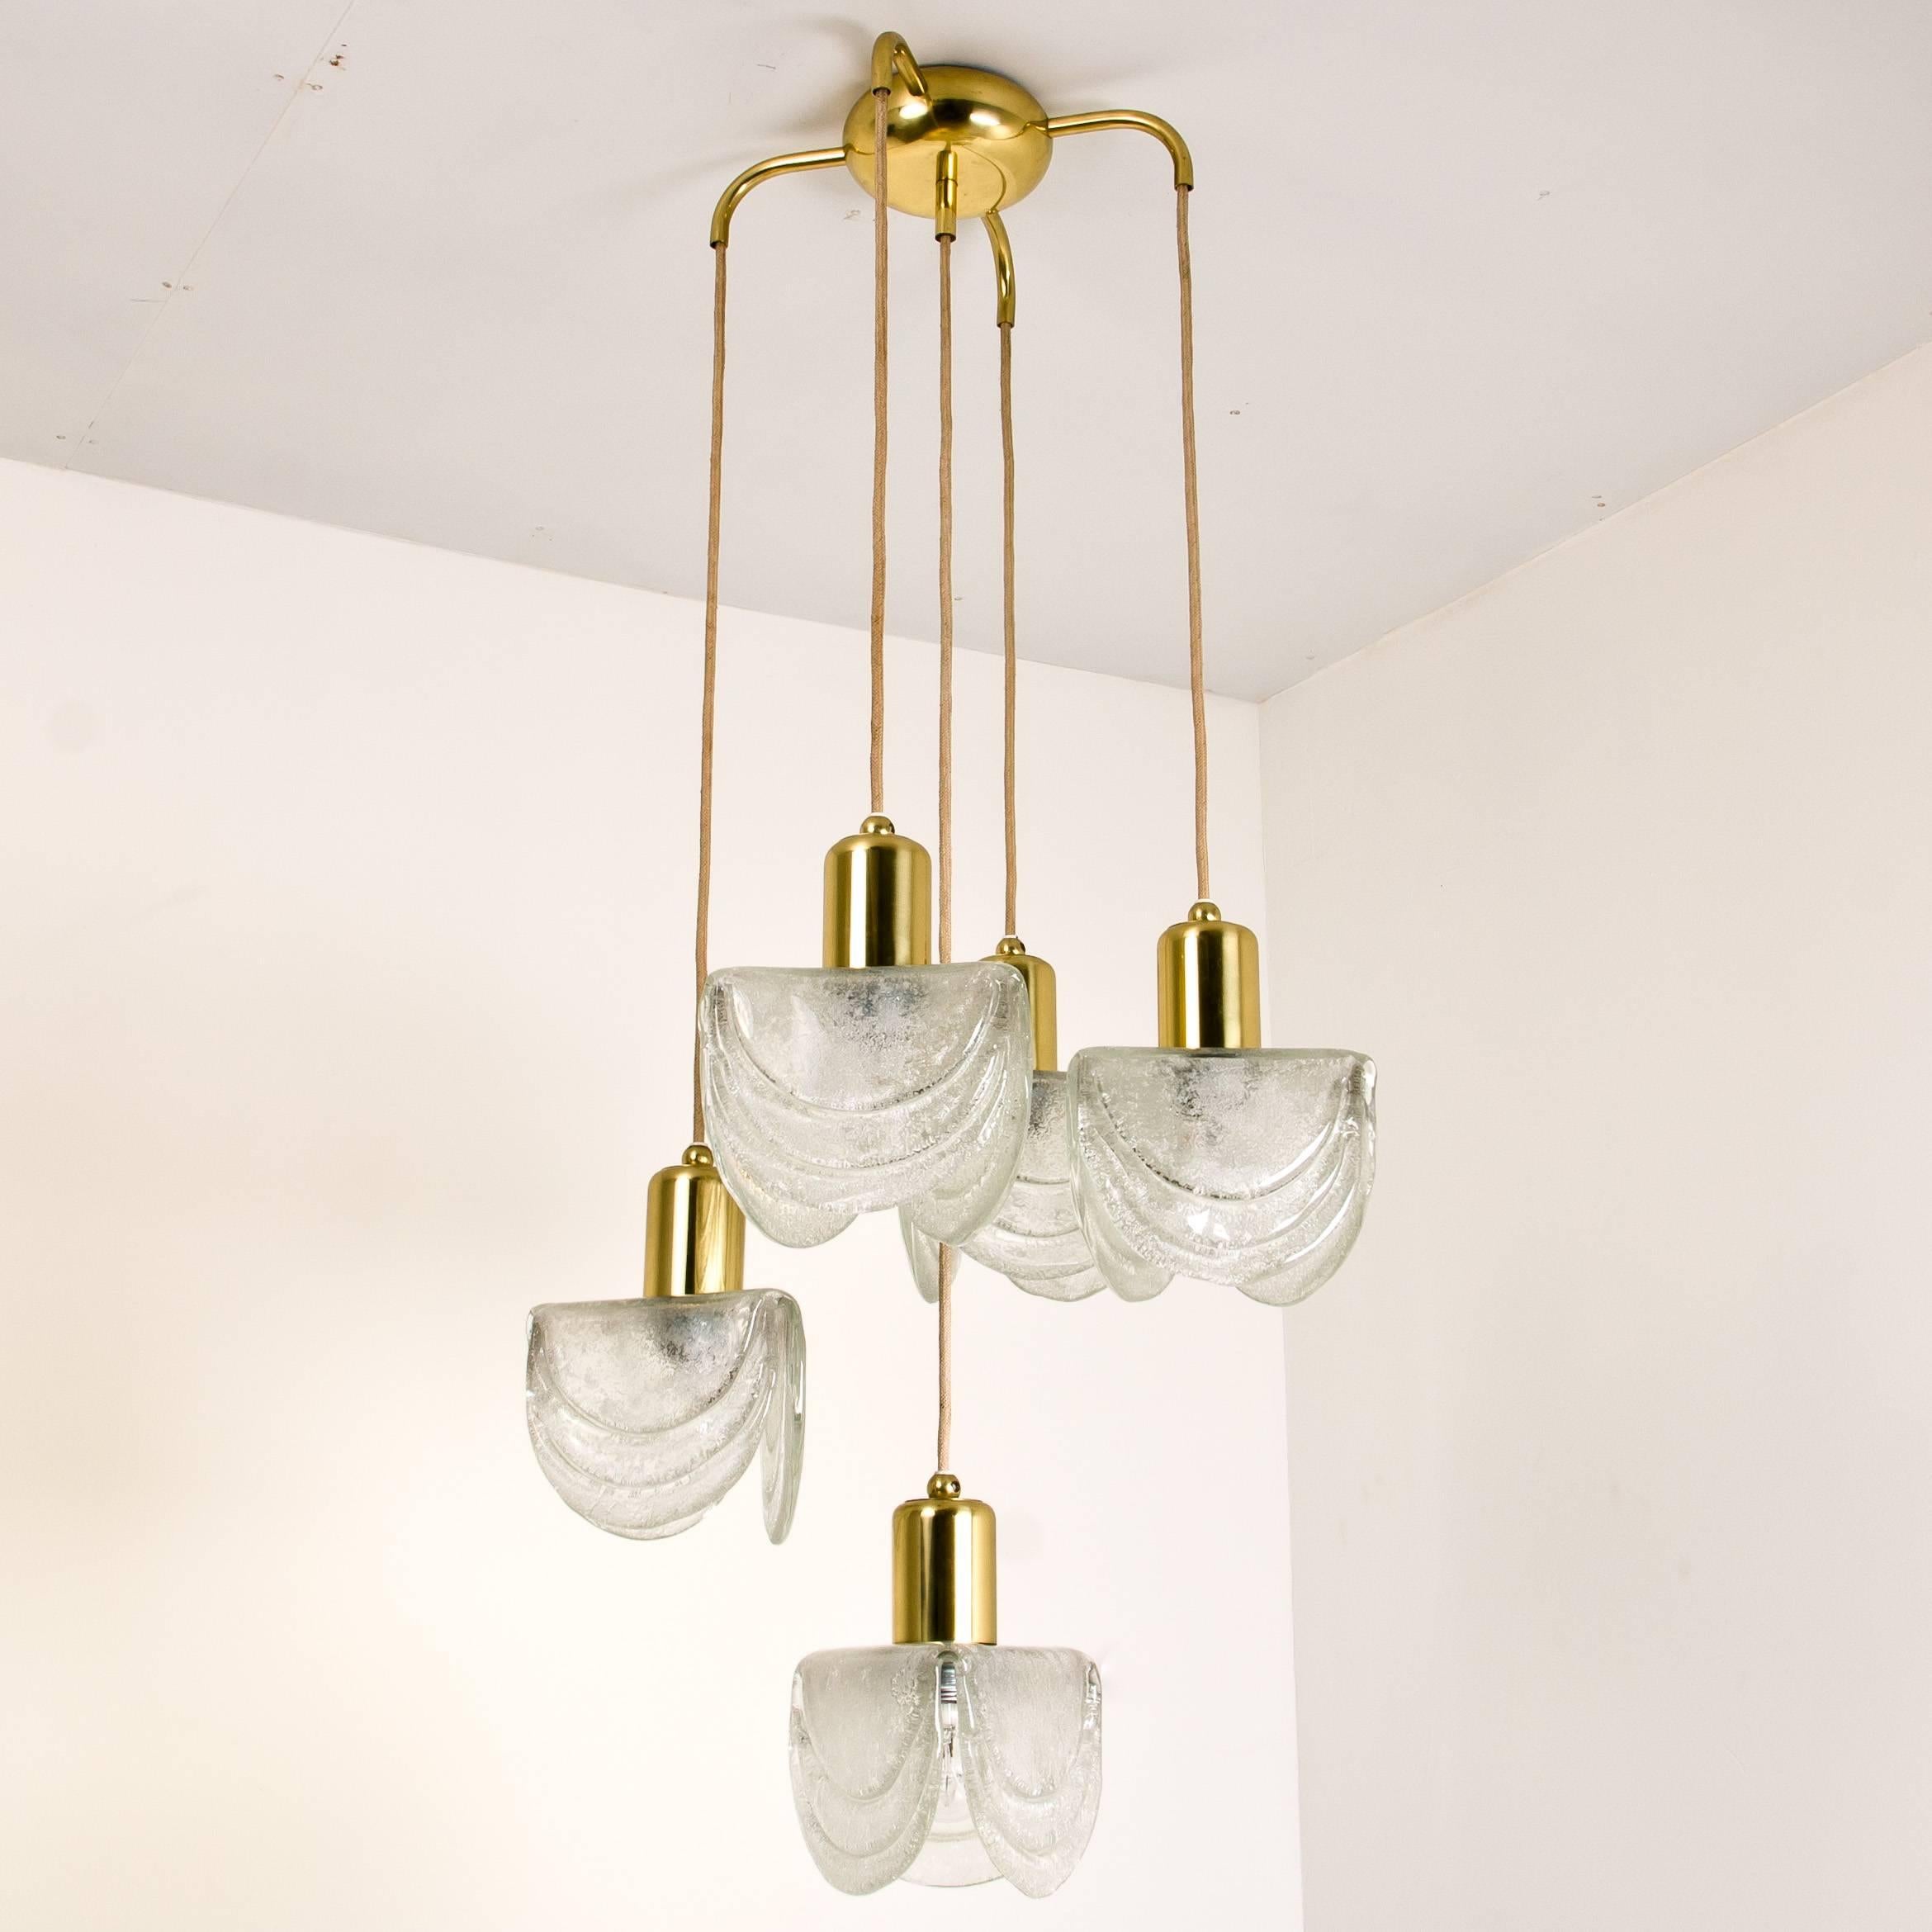 A beautiful and high quality five-tier textured hand blown glass and brass cascading chandelier, made in Austria in the early 1960s. Each glass lampshade requires an Edison E27 screw on bulb. The lamp works on 220V as well as 110V. The cables can be